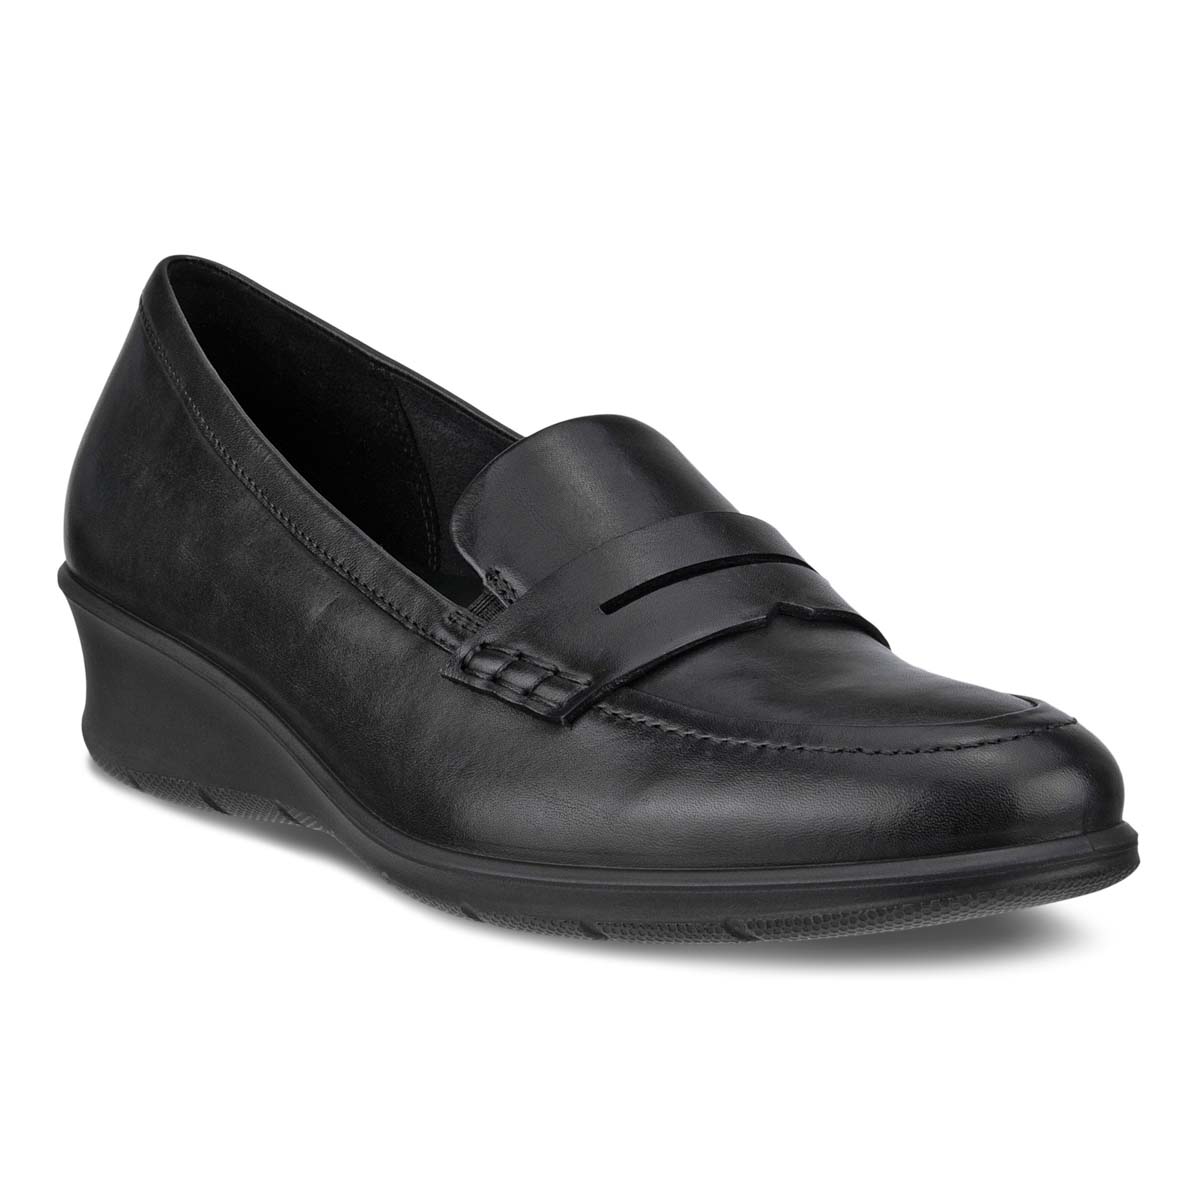 Ecco Felicia Loafer Black Leather Womens Comfort Slip On Shoes 217323-01001 In Size 40 In Plain Black Leather